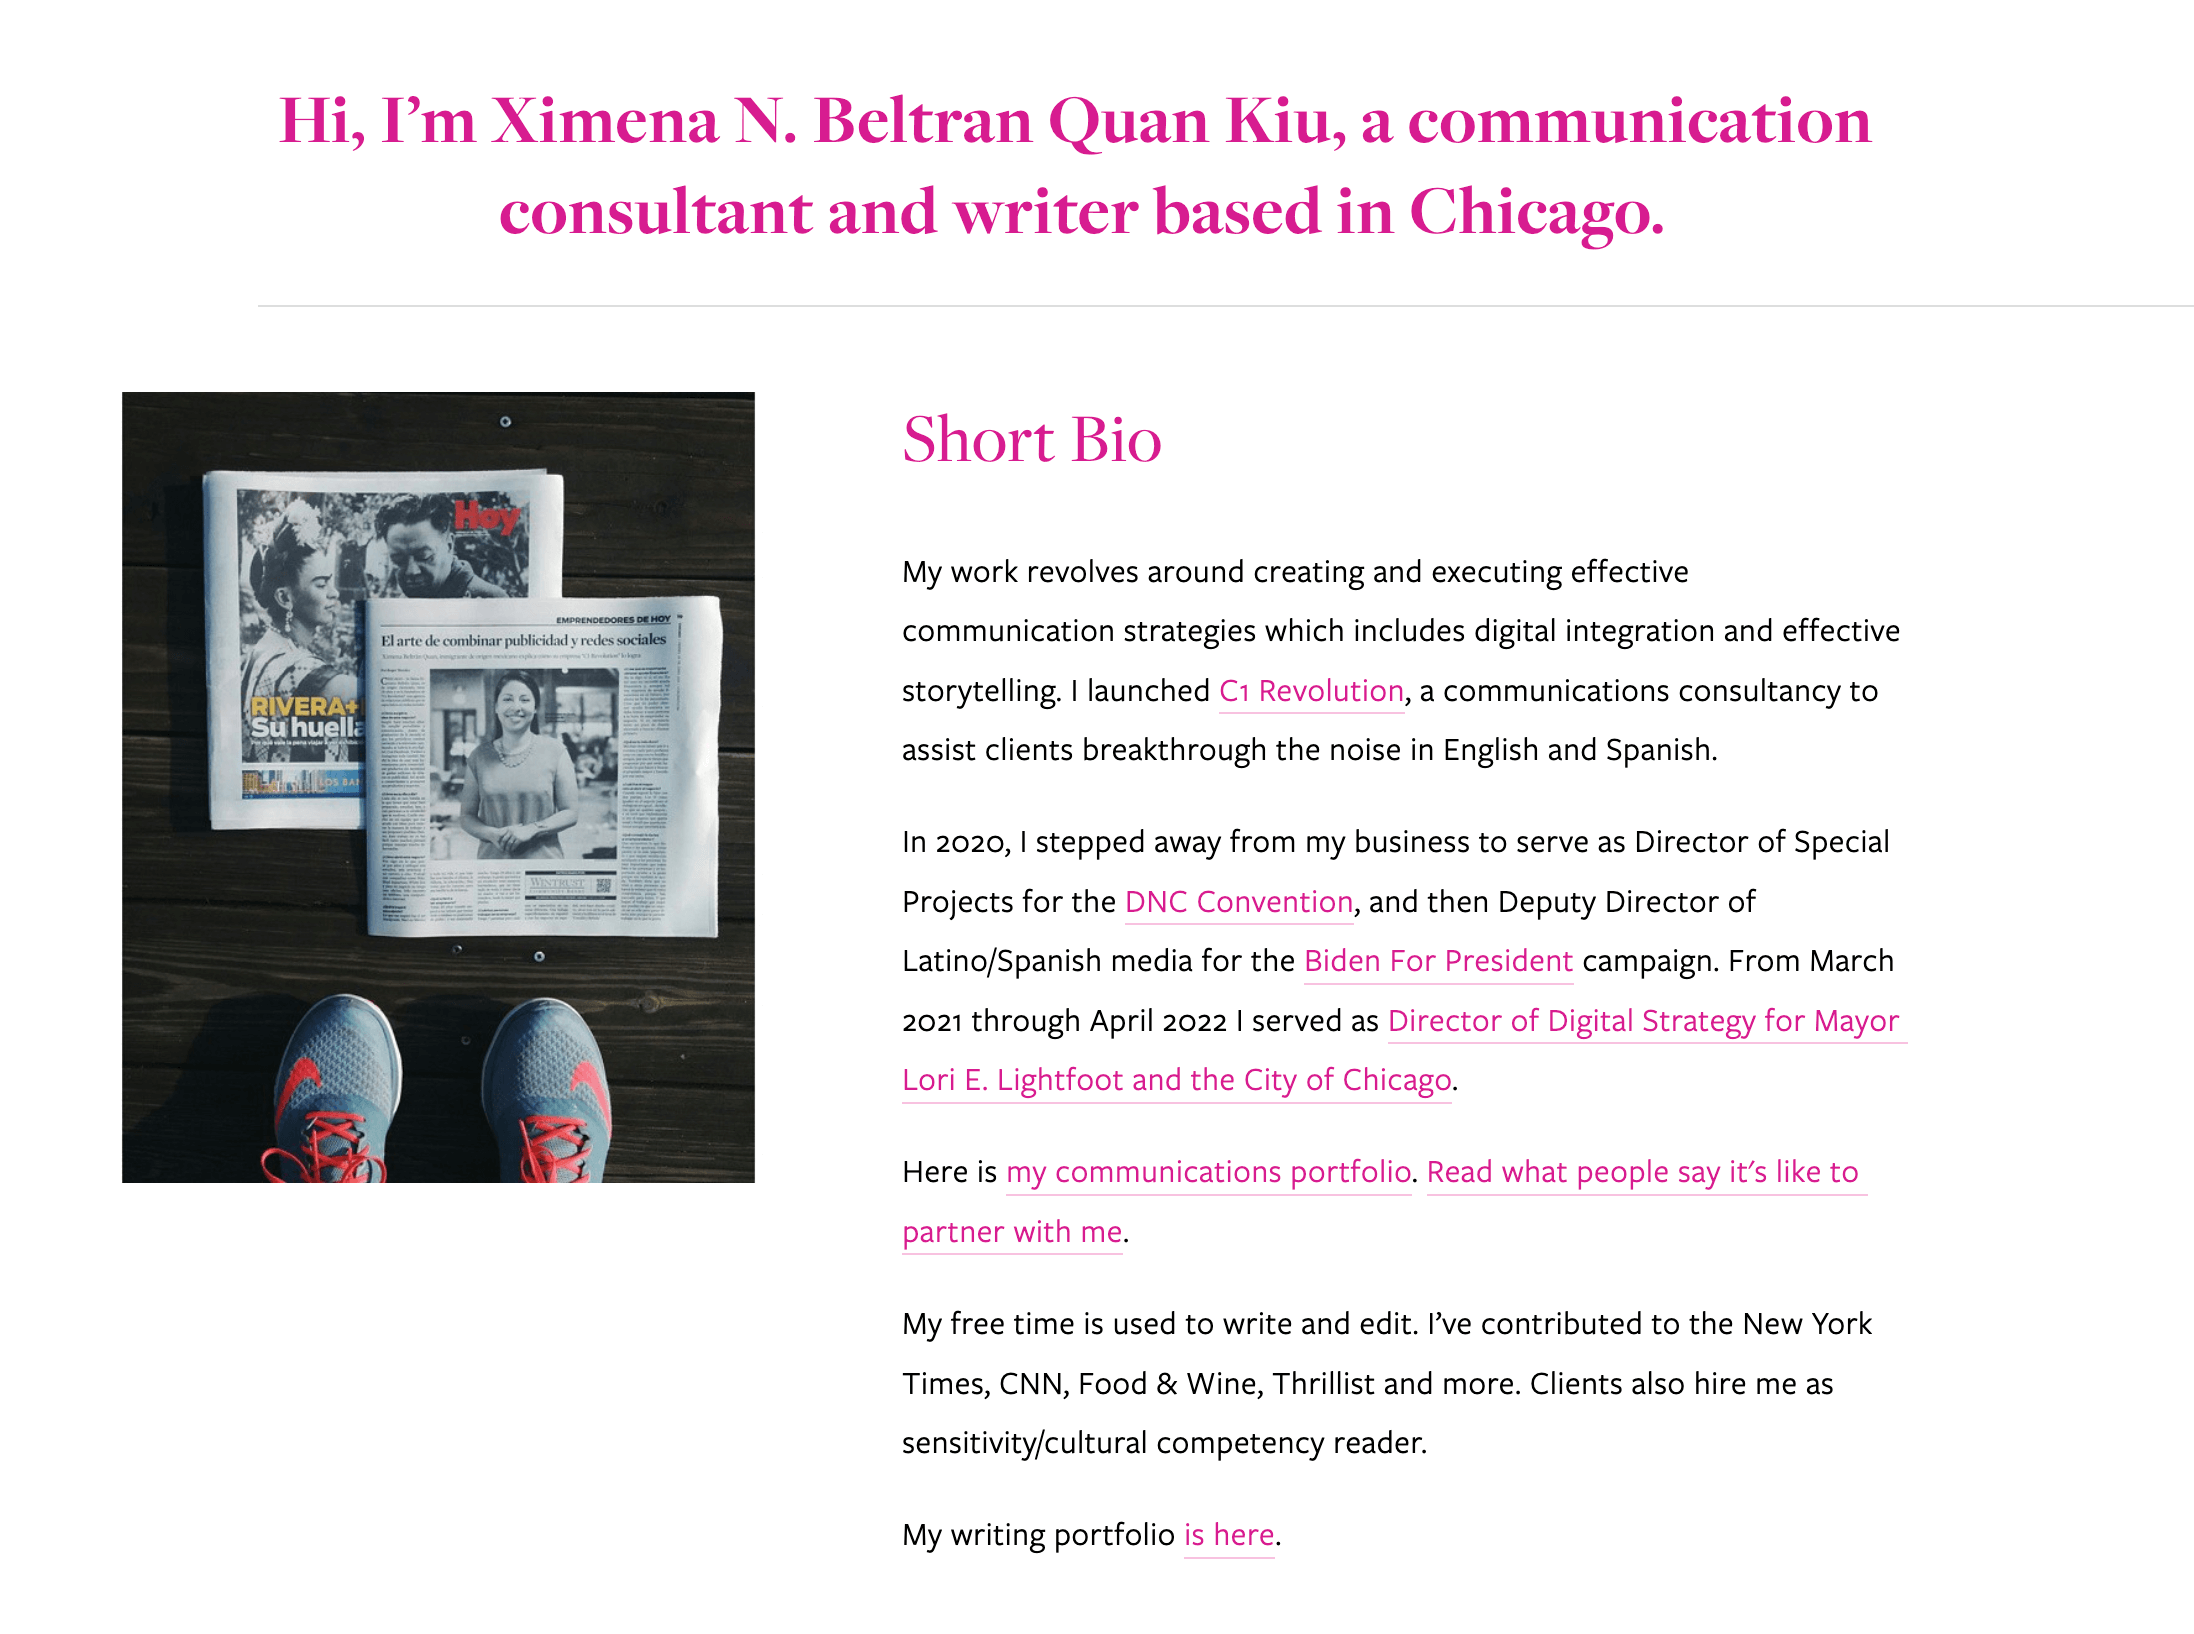 The bio page for Ximena N. Beltran Quan Kiu, a communication consultant and writer based in Chicago. The image is of an article about her next to a pair of shoes. The bio details the highlights of her political communications career.